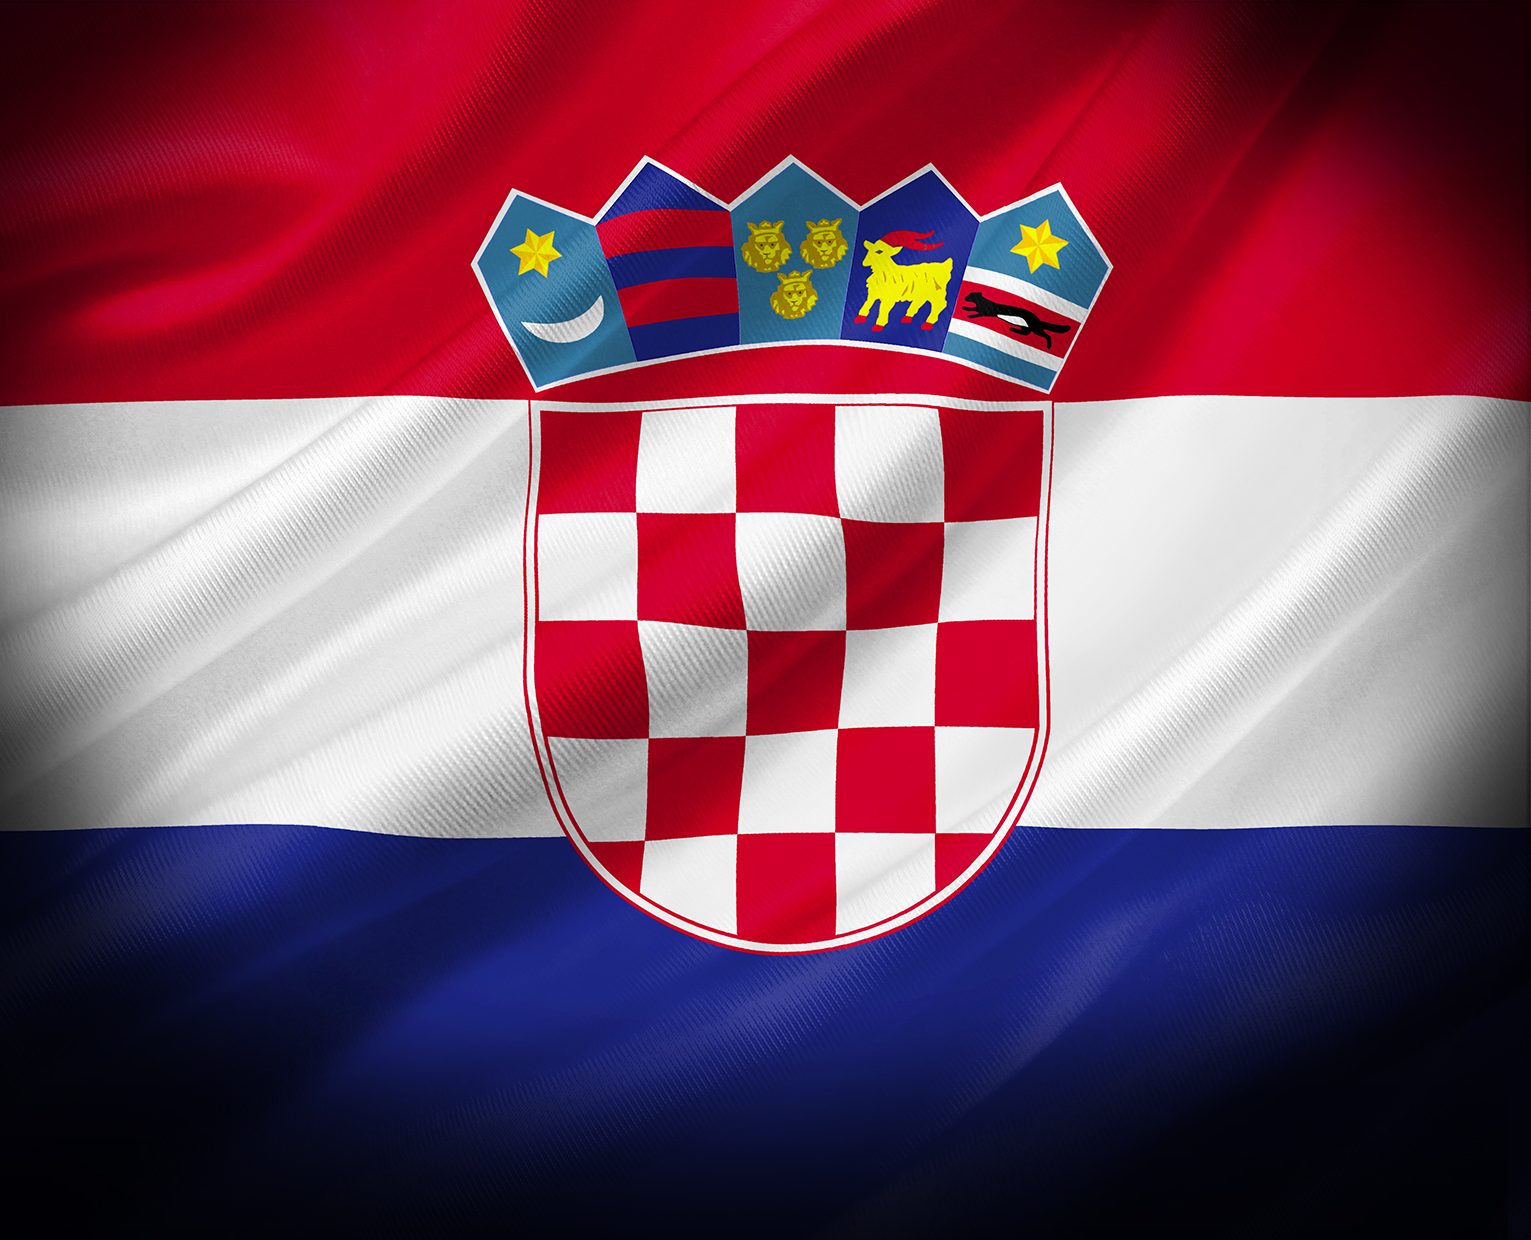 Croatia – Entain makes its mark in CEE region following SuperSport acquisition